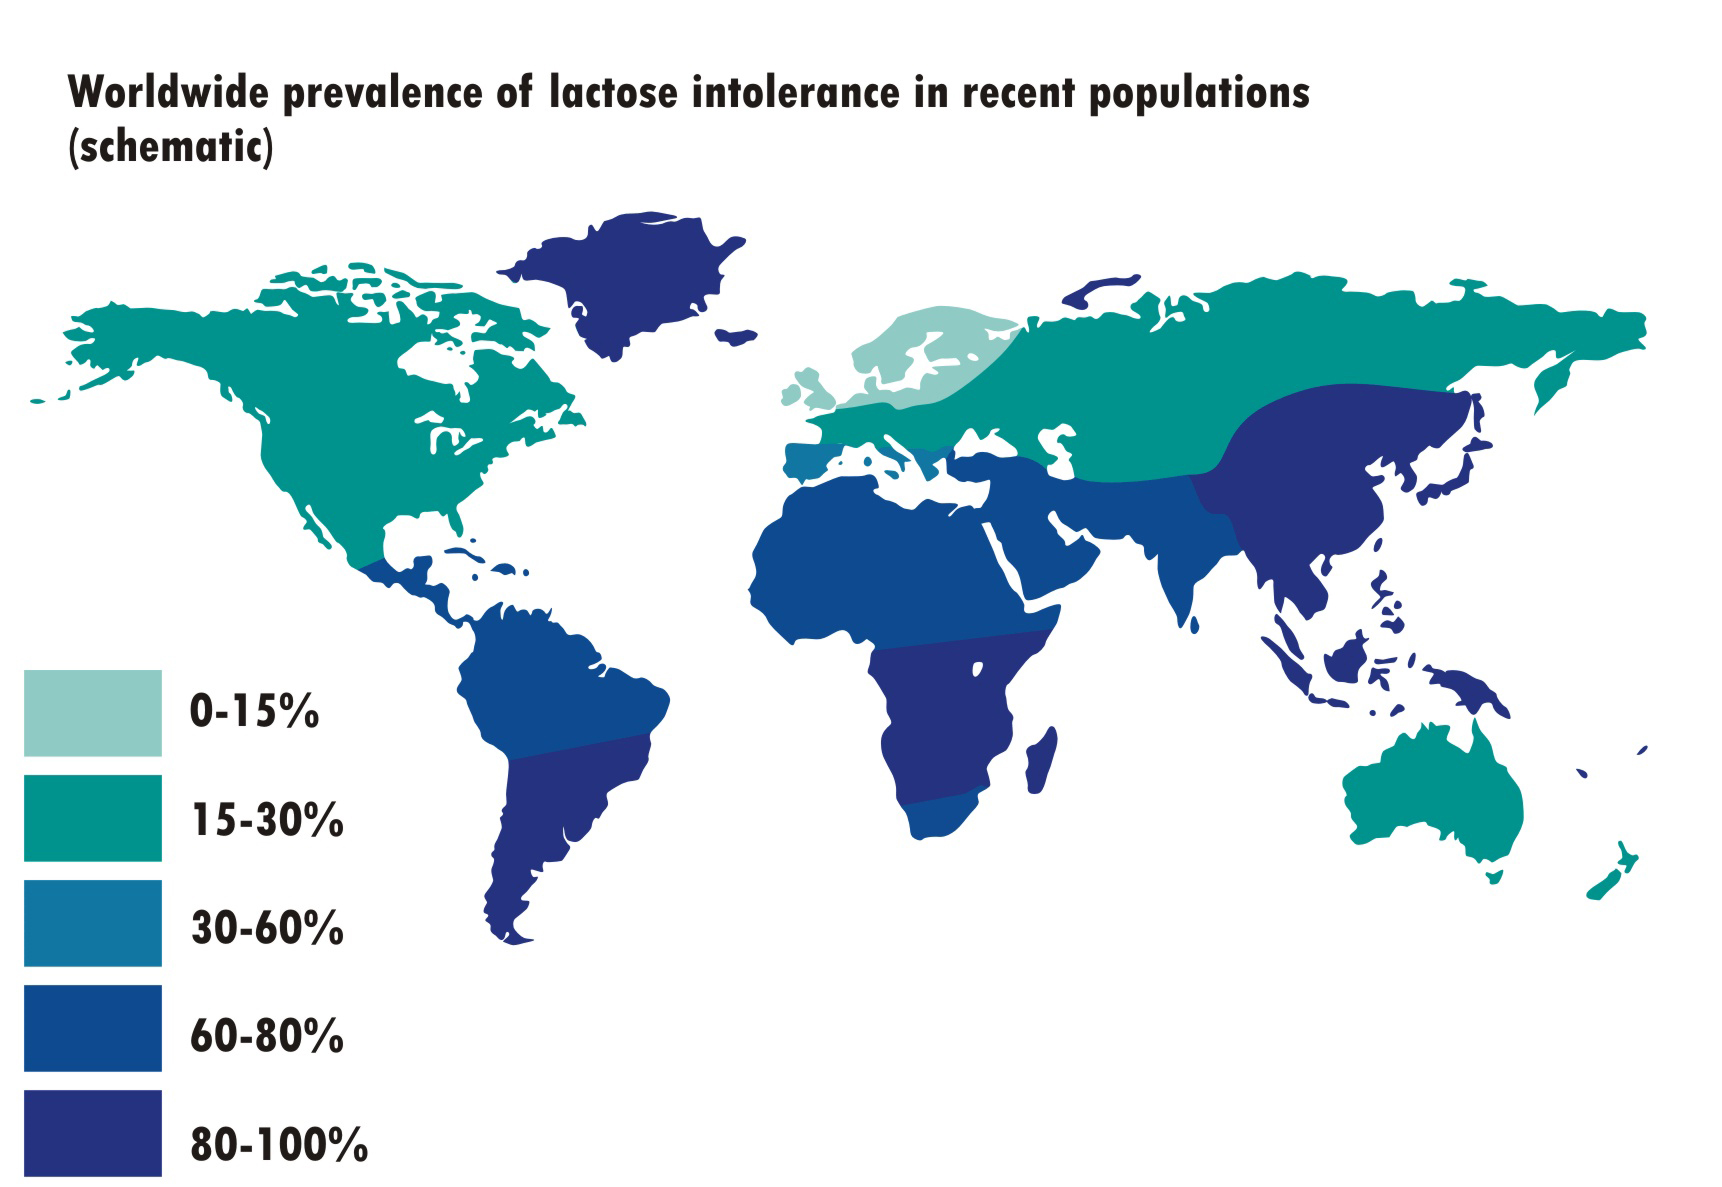 Worldwide_prevalence_of_lactose_intolerance_in_recent_populations.jpg